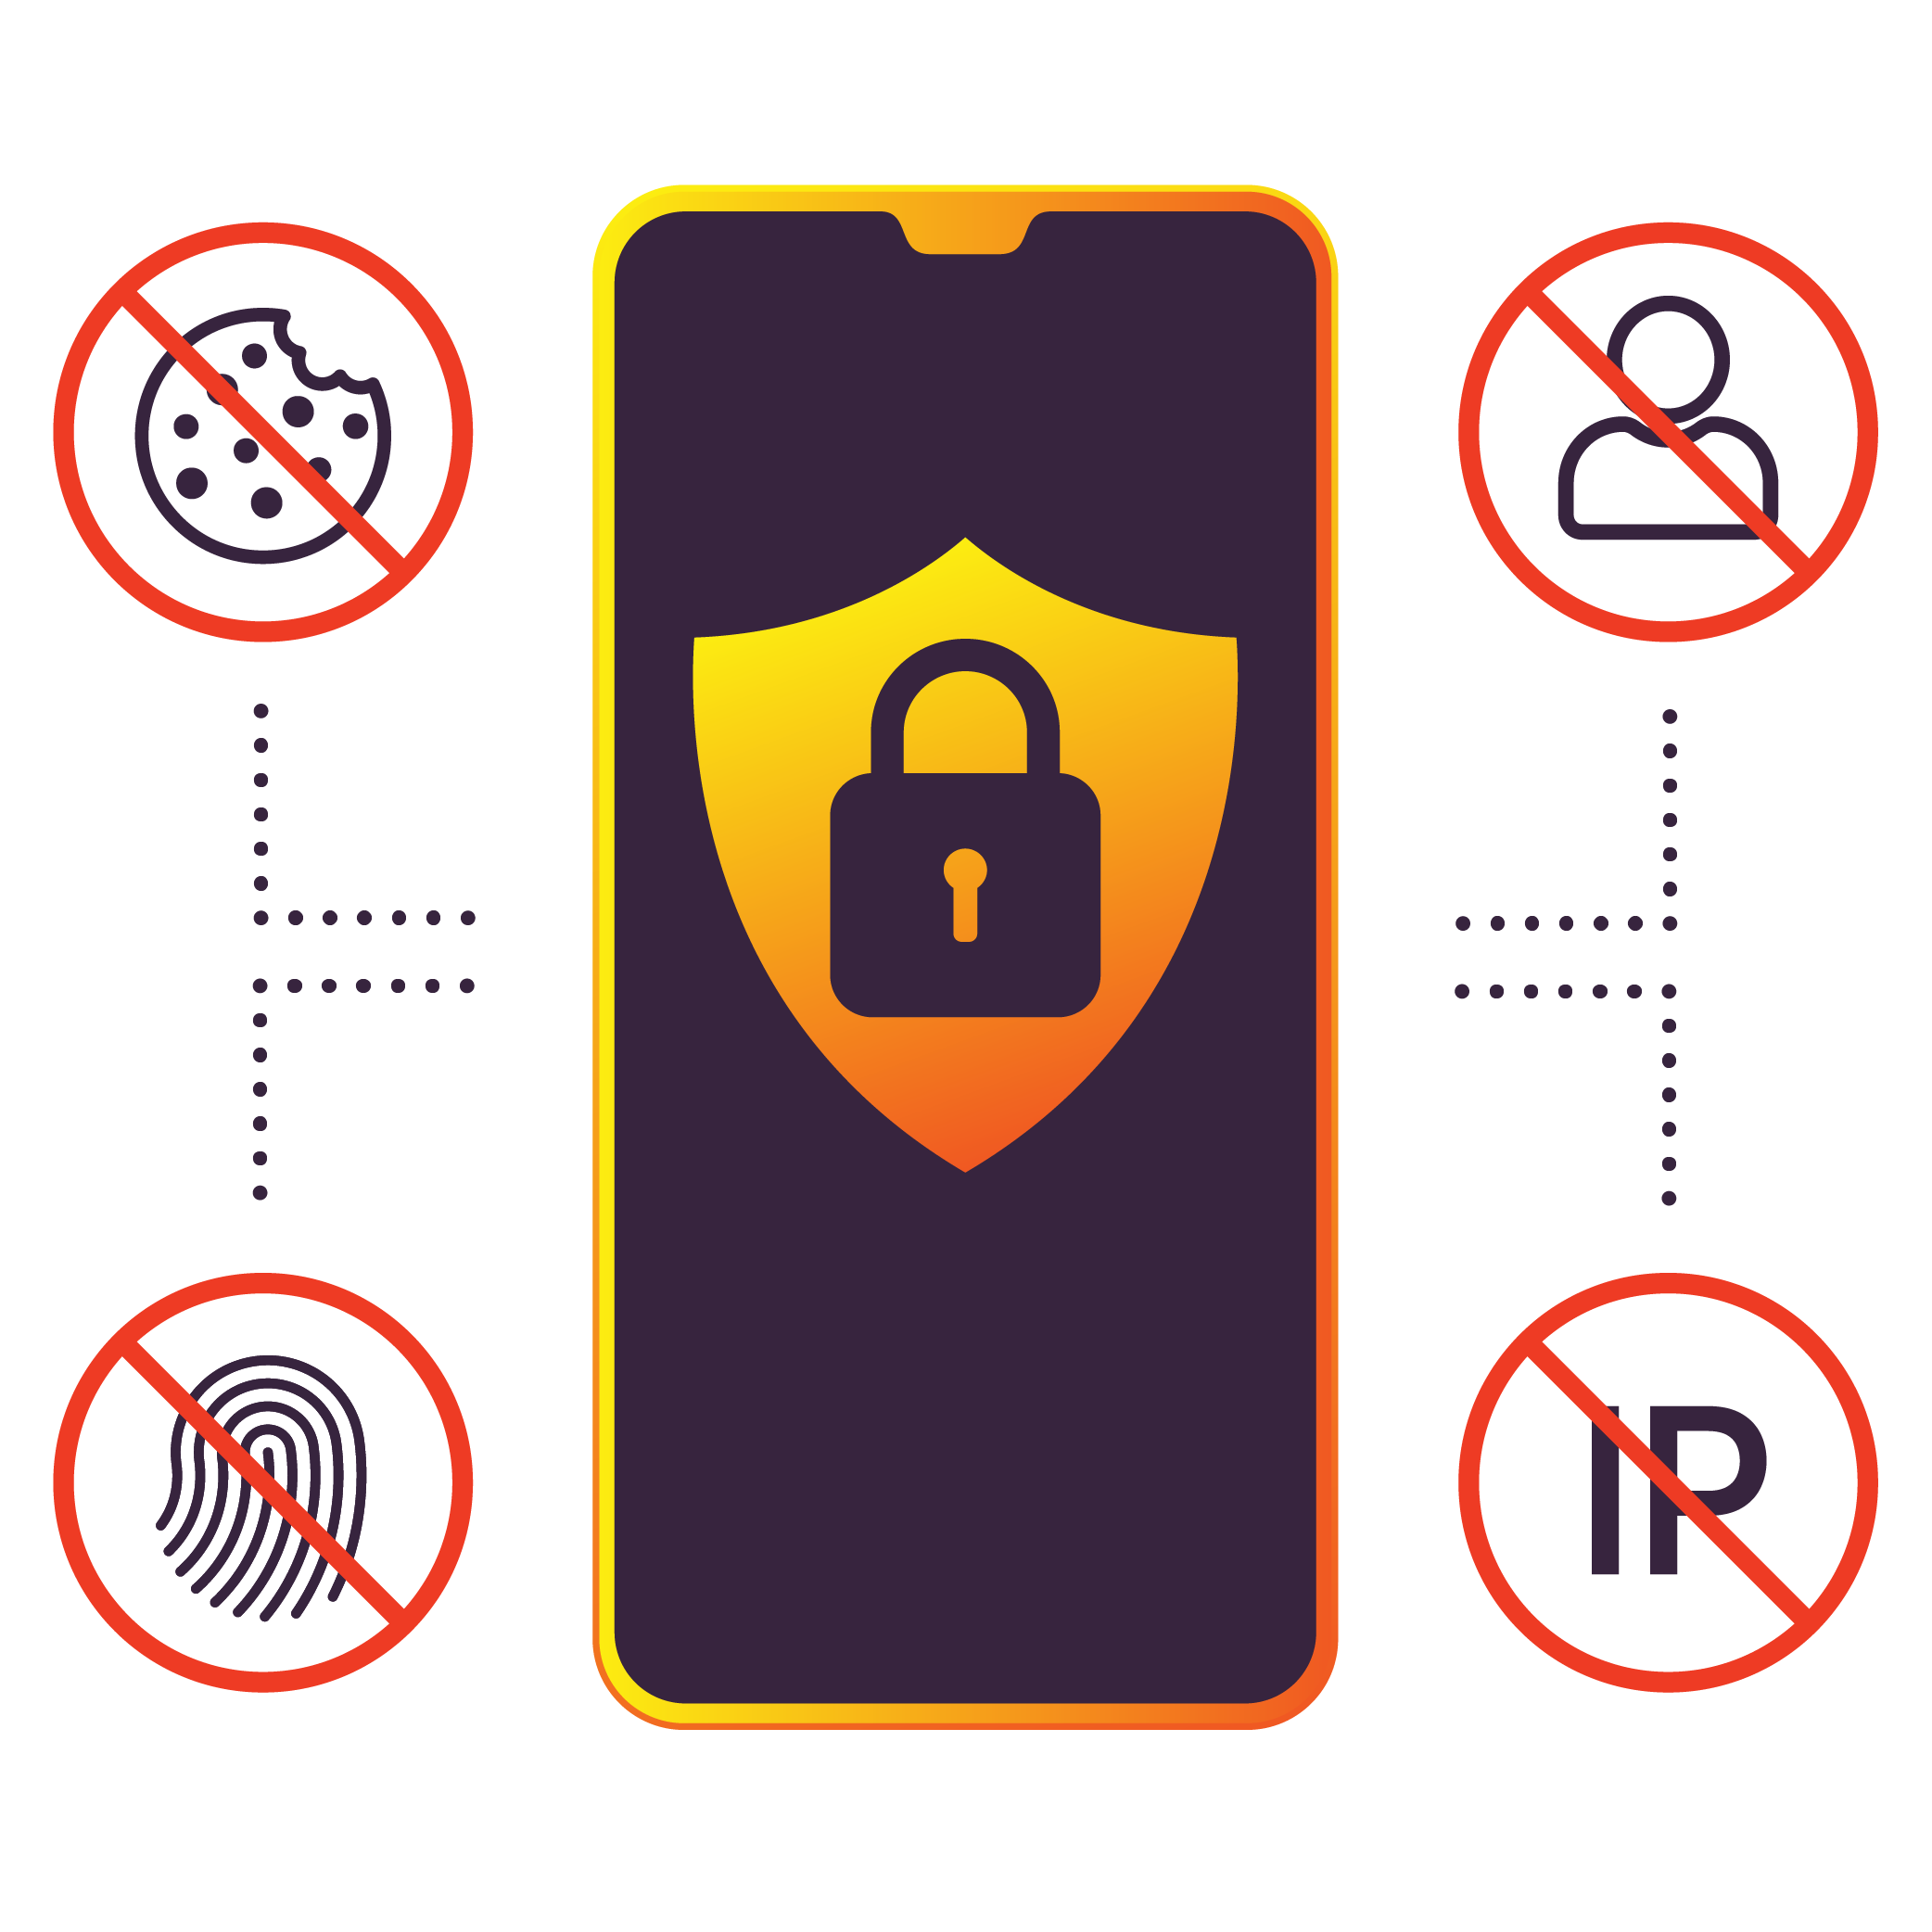 phone icon showing data privacy